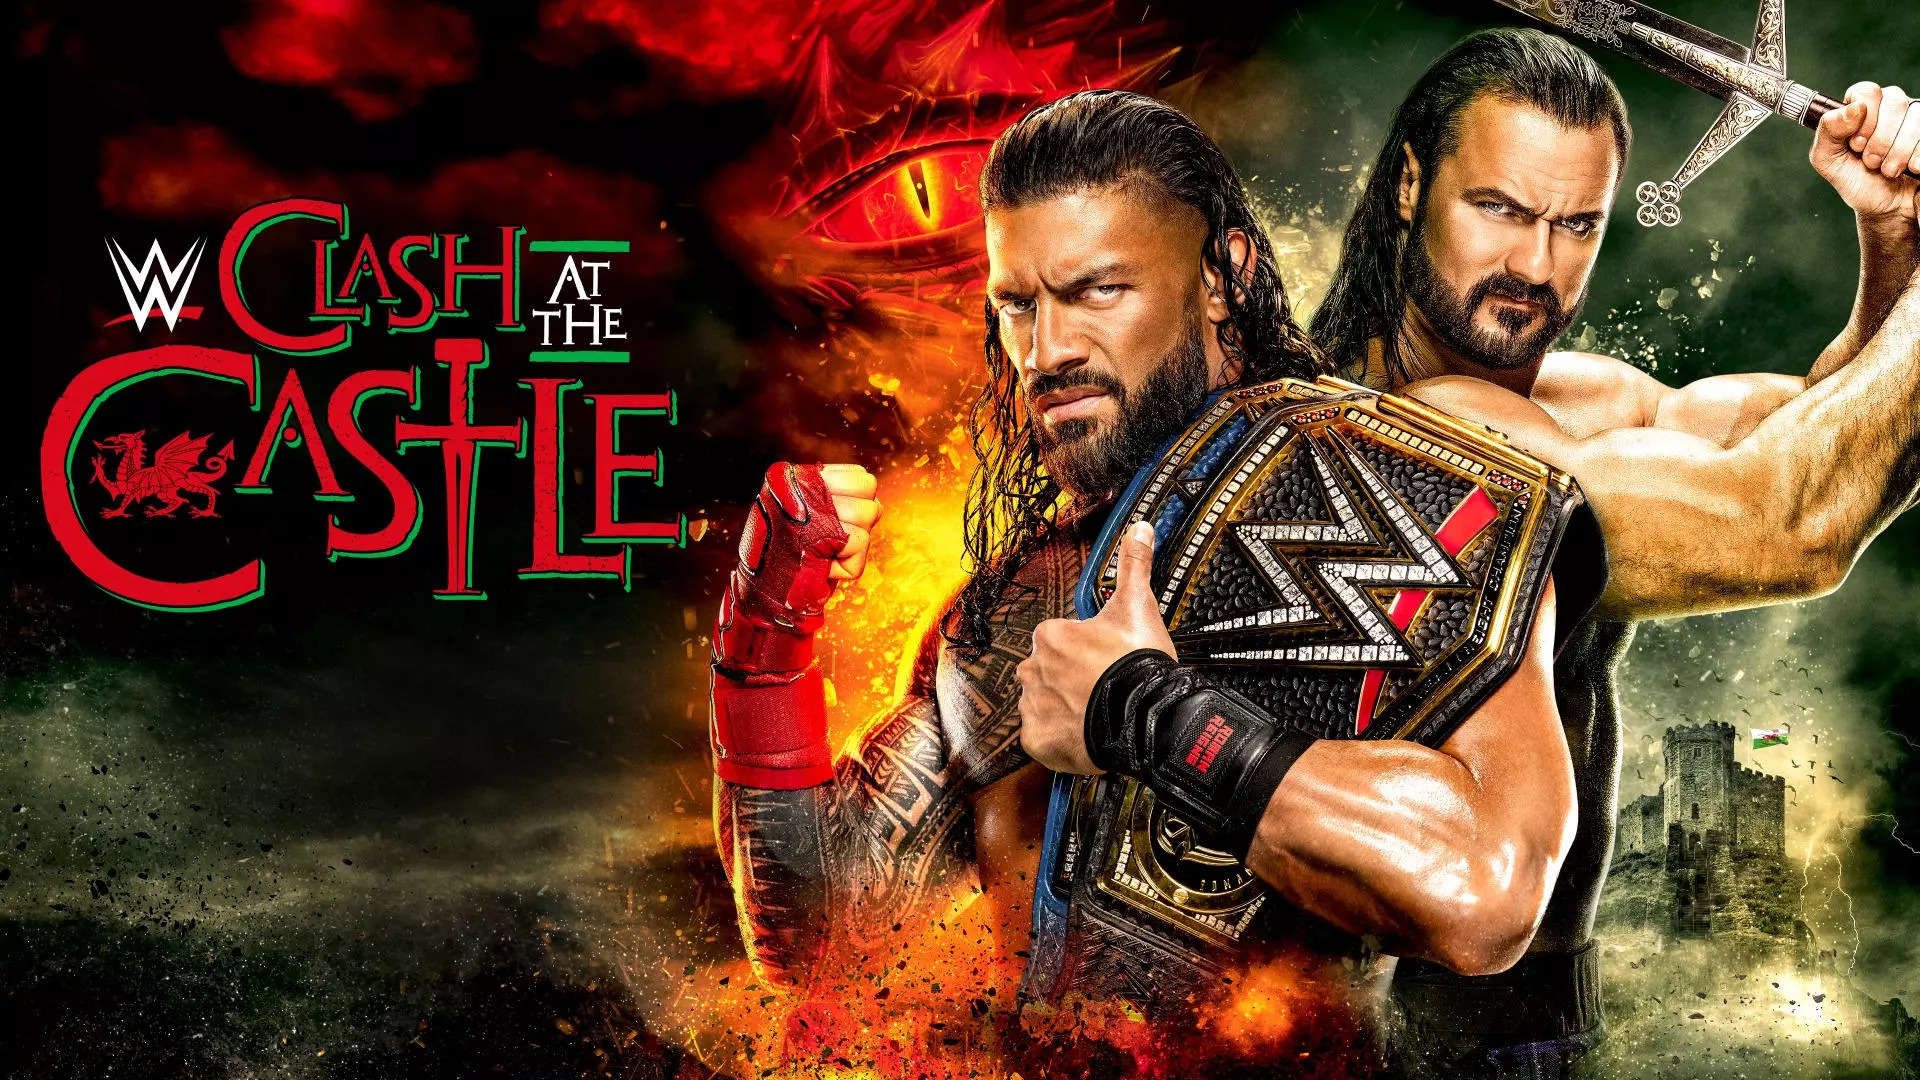 3 shocking finishes that might happen in Roman Reigns vs Drew McIntyre main  event at Clash at the Castle